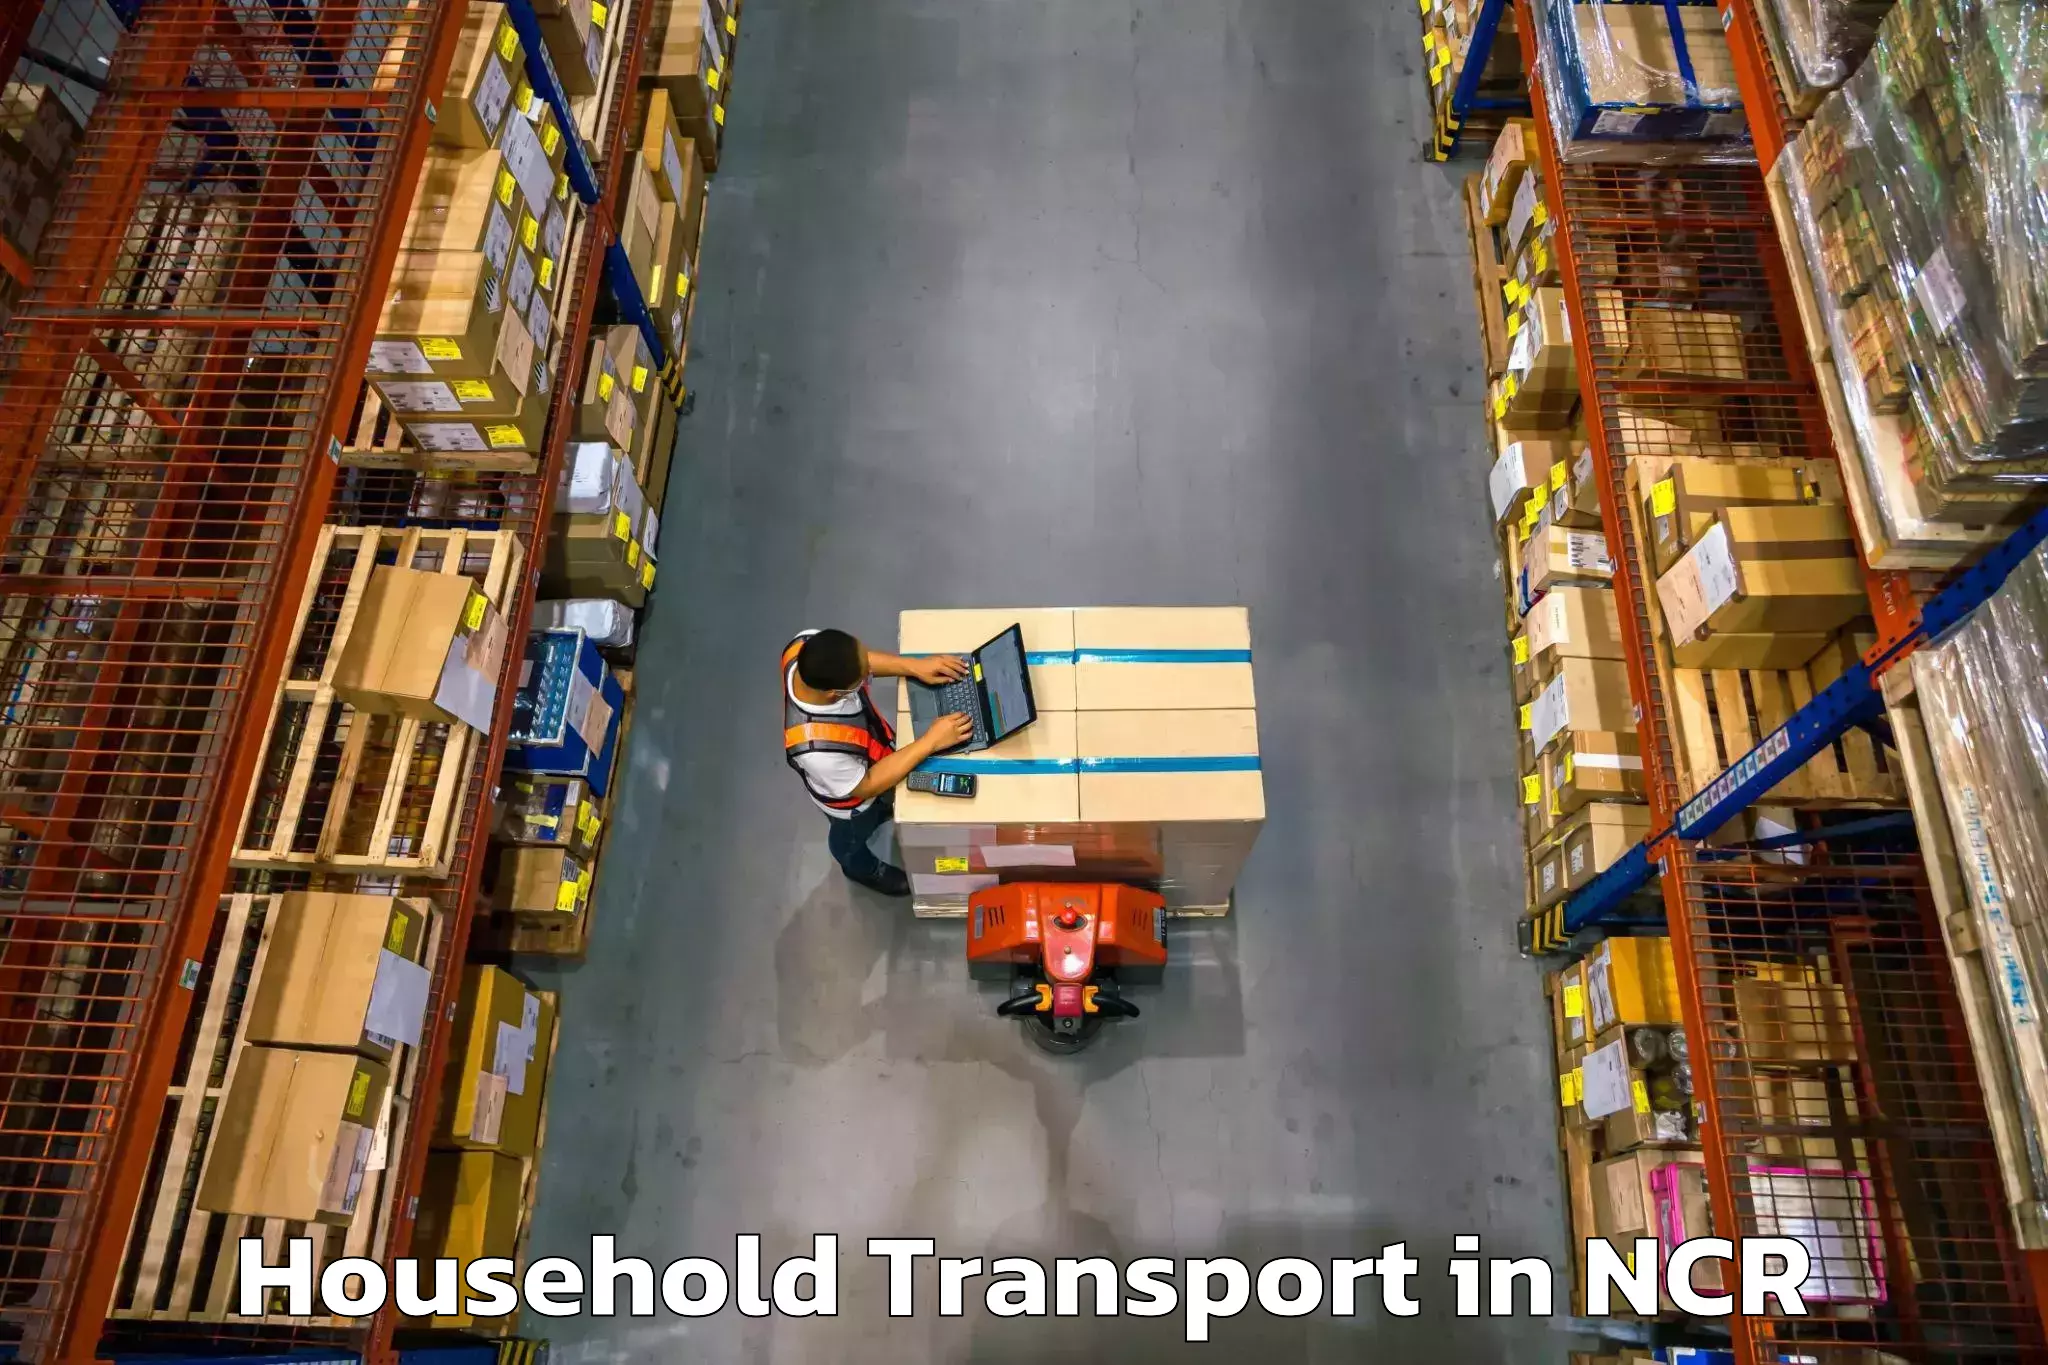 Furniture transport and storage in NCR